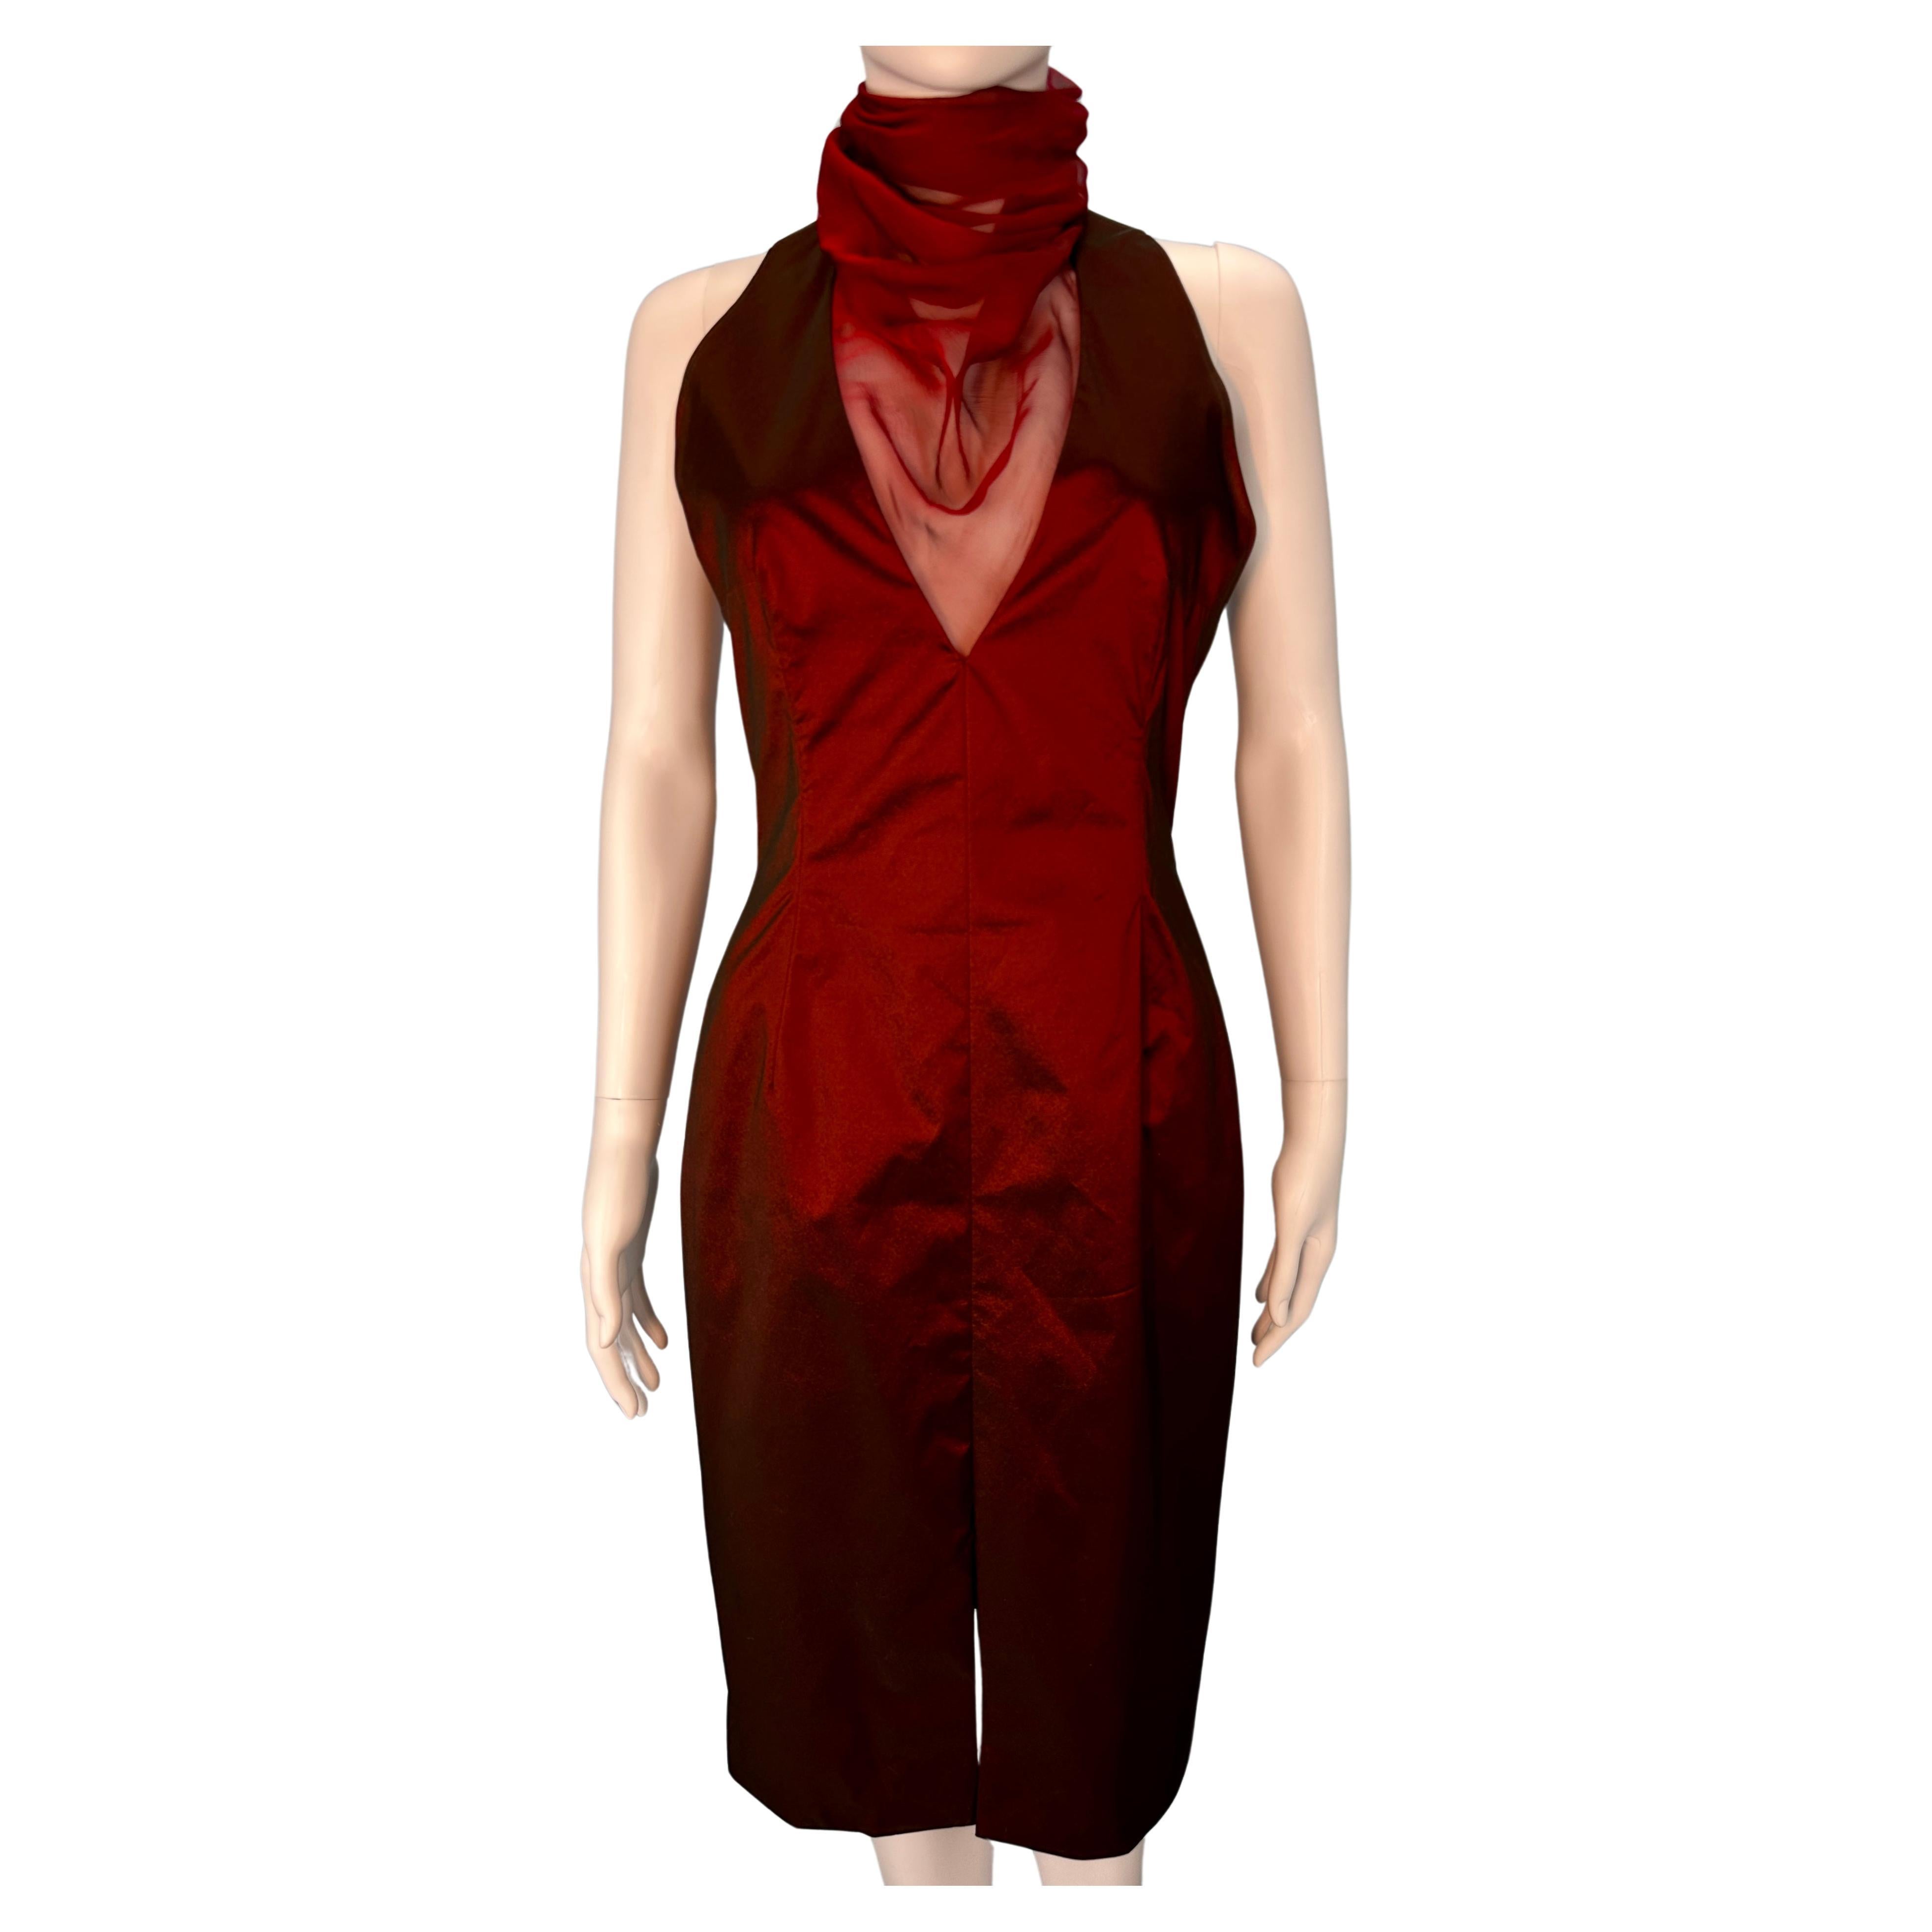 Givenchy Couture by Alexander McQueen Fall 1998 Red Chiffon Mock Neck Dress For Sale